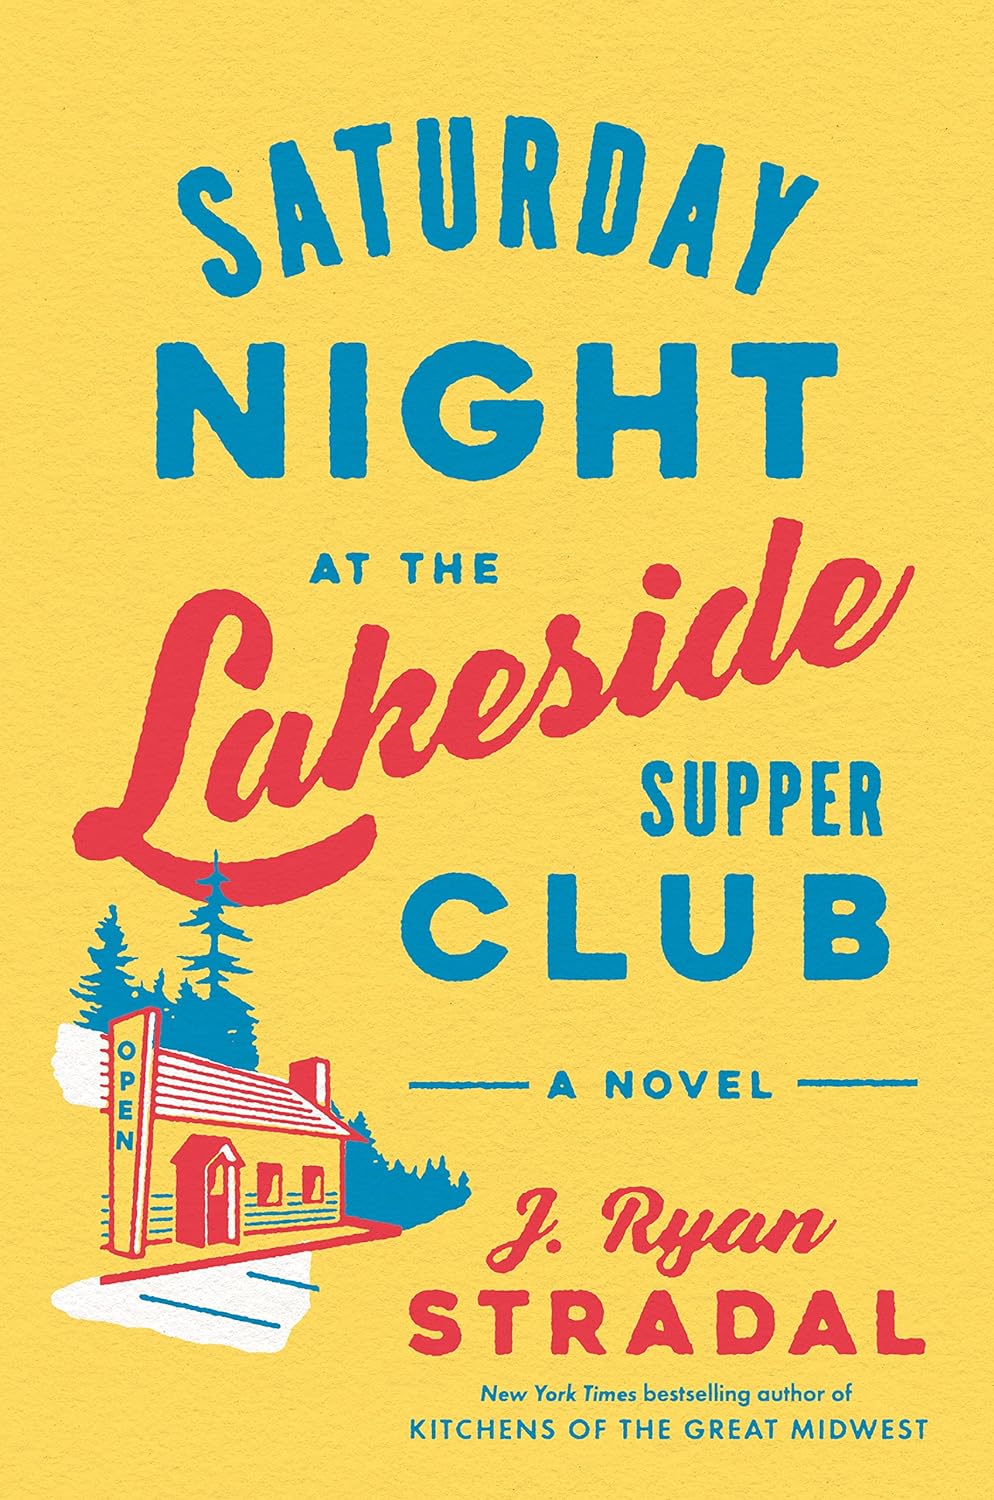 Image for "Saturday Night at the Lakeside Supper Club: A Novel"